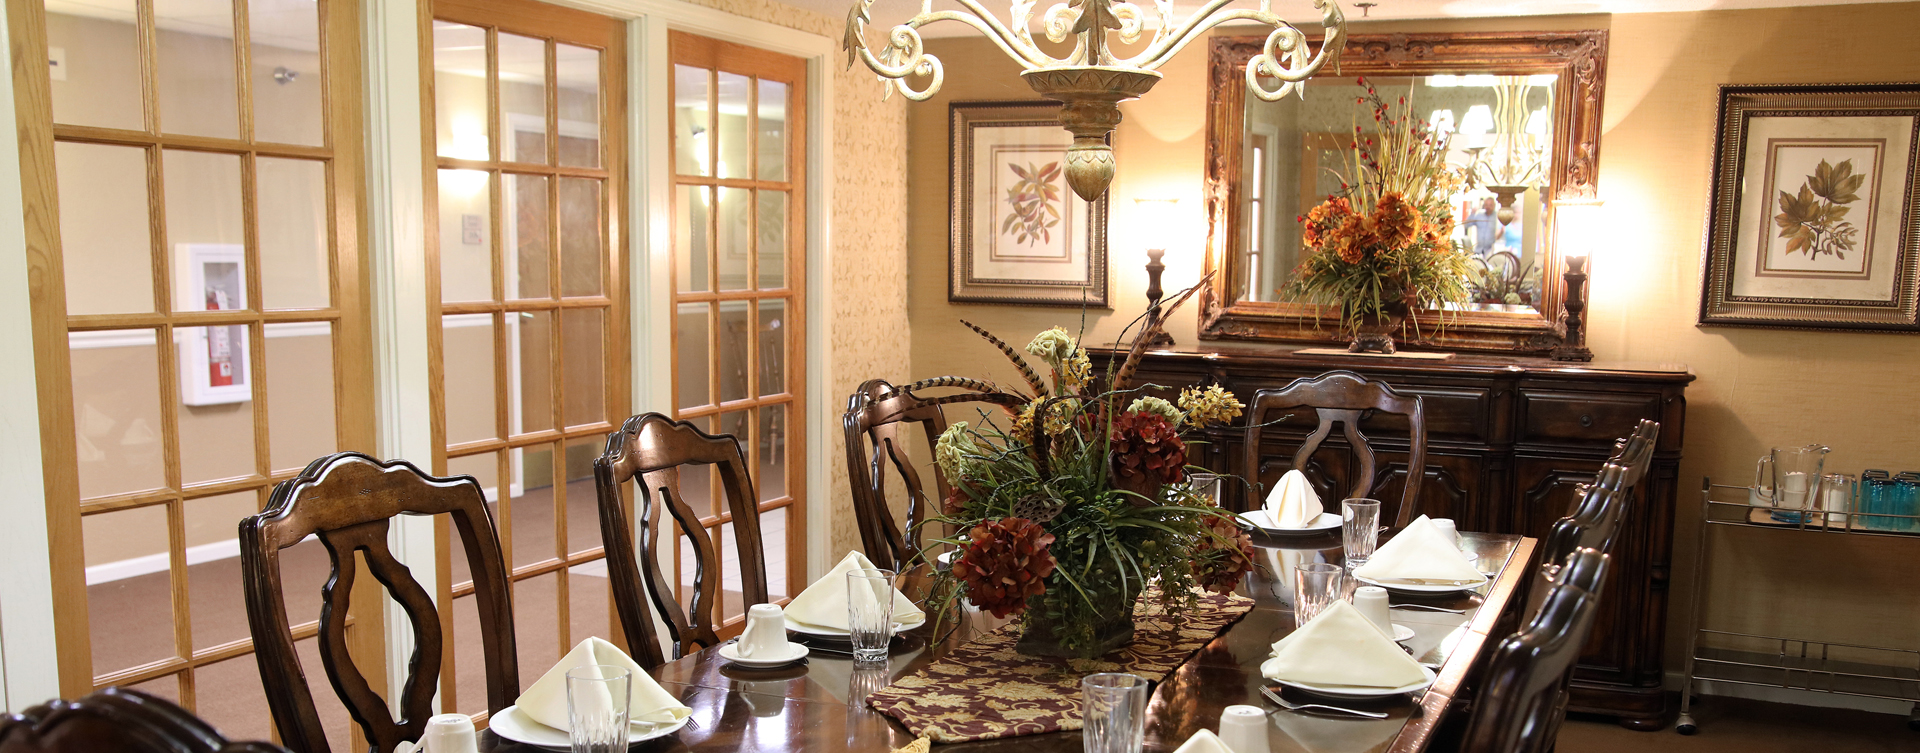 Celebrate special occasions in the private dining room at Bickford of Rockford